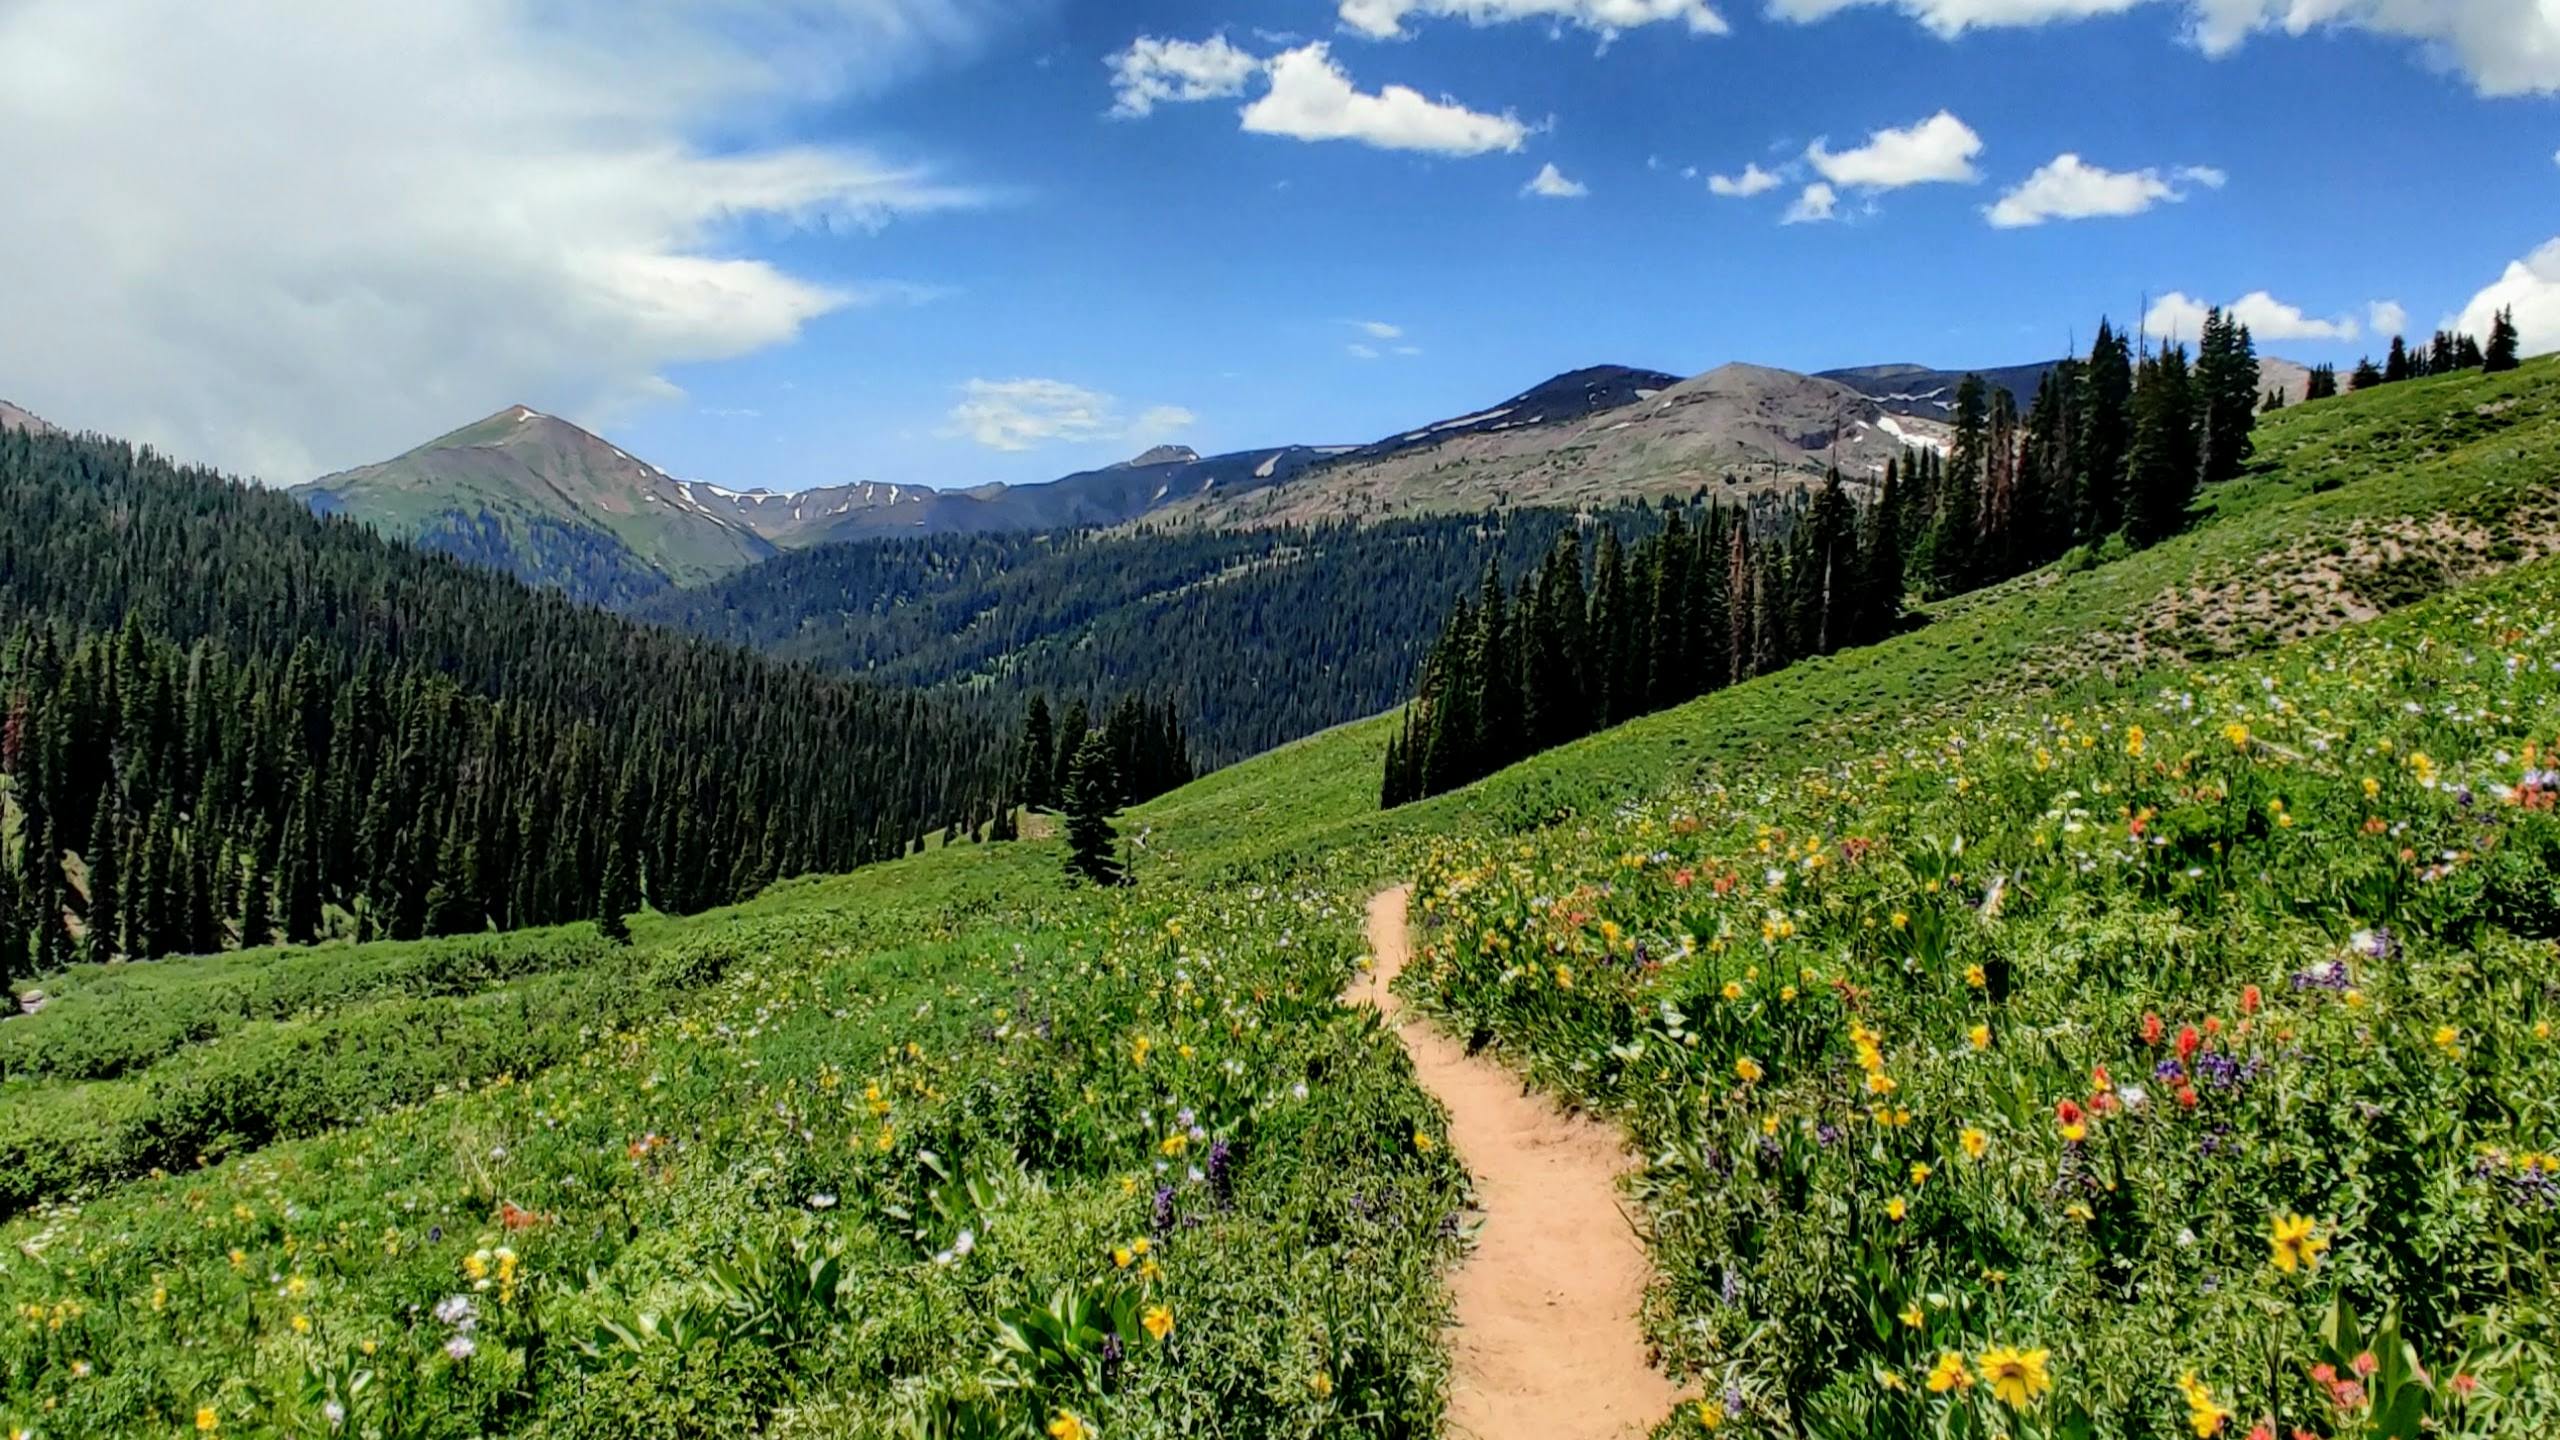 The photo is centered on a trail that goes through a gently sloped field of wildflowers with mountains in the background.